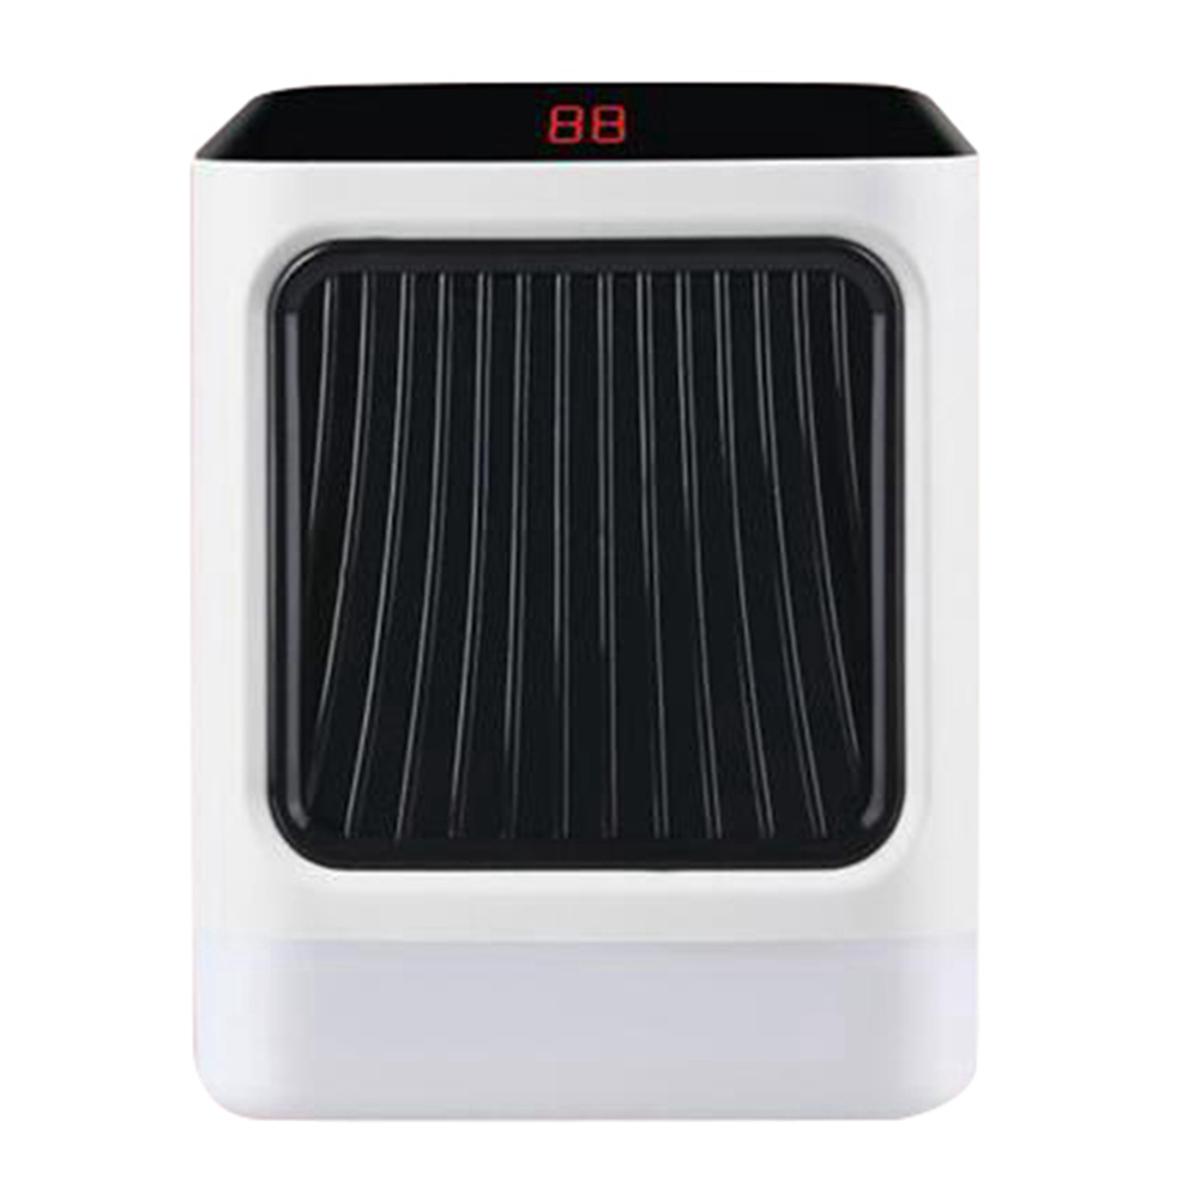 Eu Plug Ceramic Heater Electric Fan,2S Quick Warming 3 Stage Switching Timer Energy Saving Heating Small Electric Stove